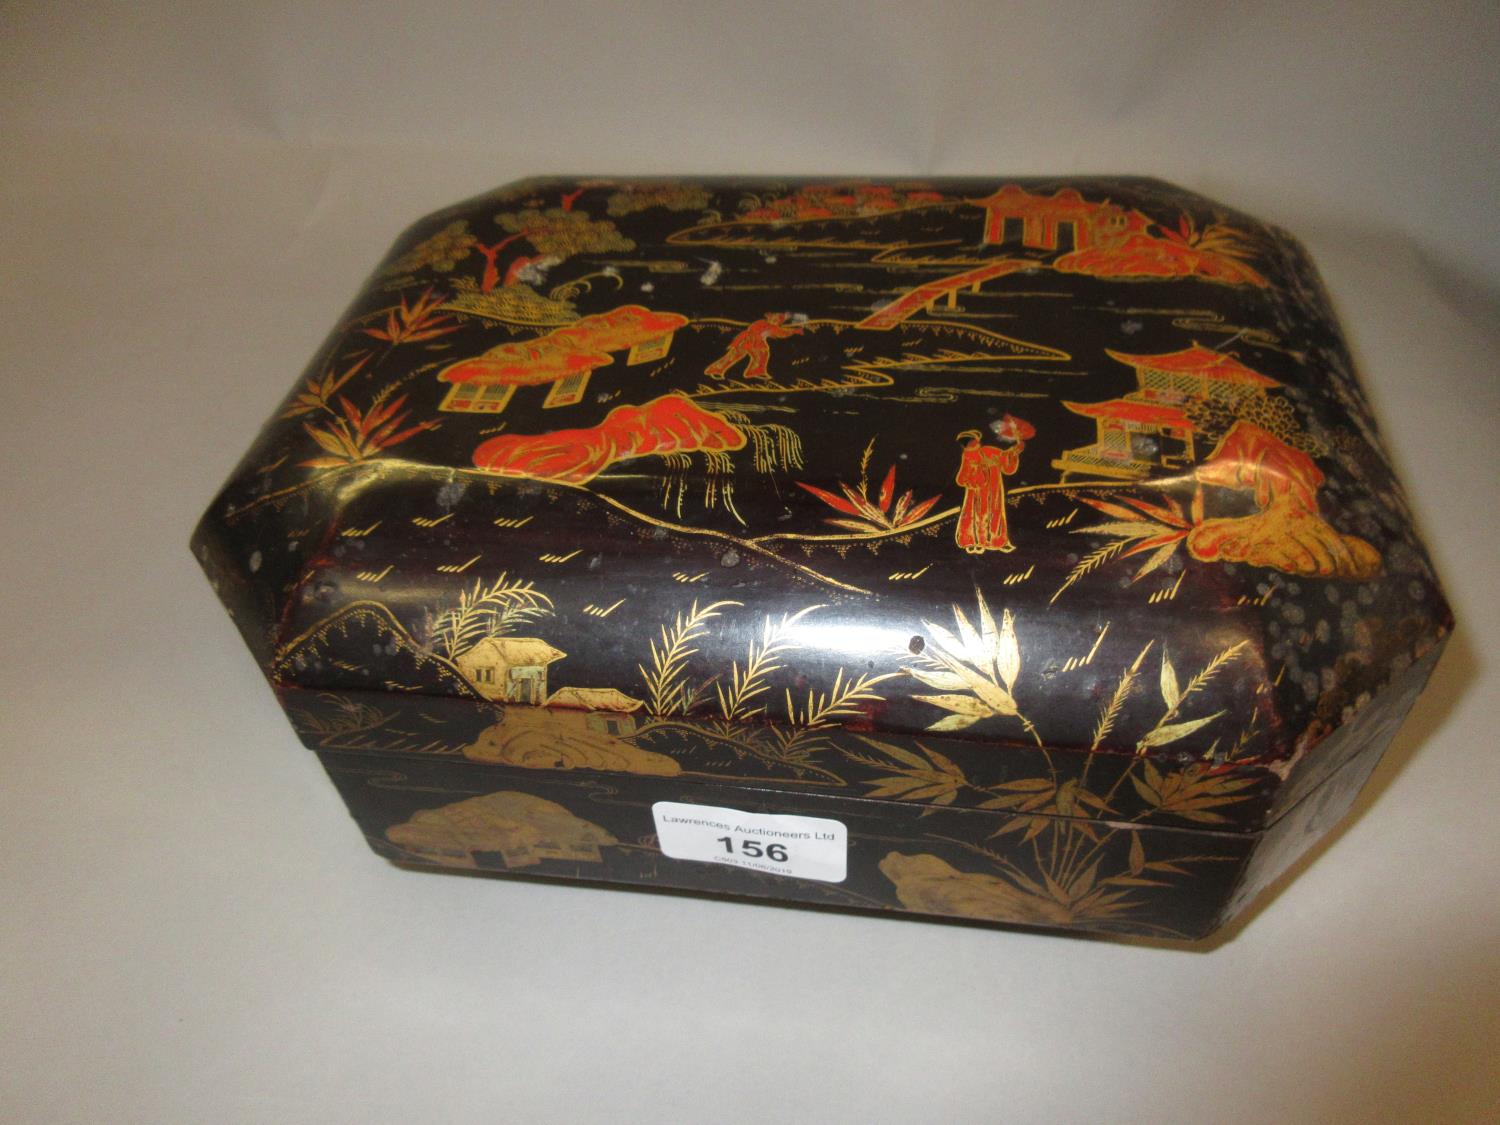 19th Century black cloisonne octagonal work box, the hinged cover enclosing a fitted interior with